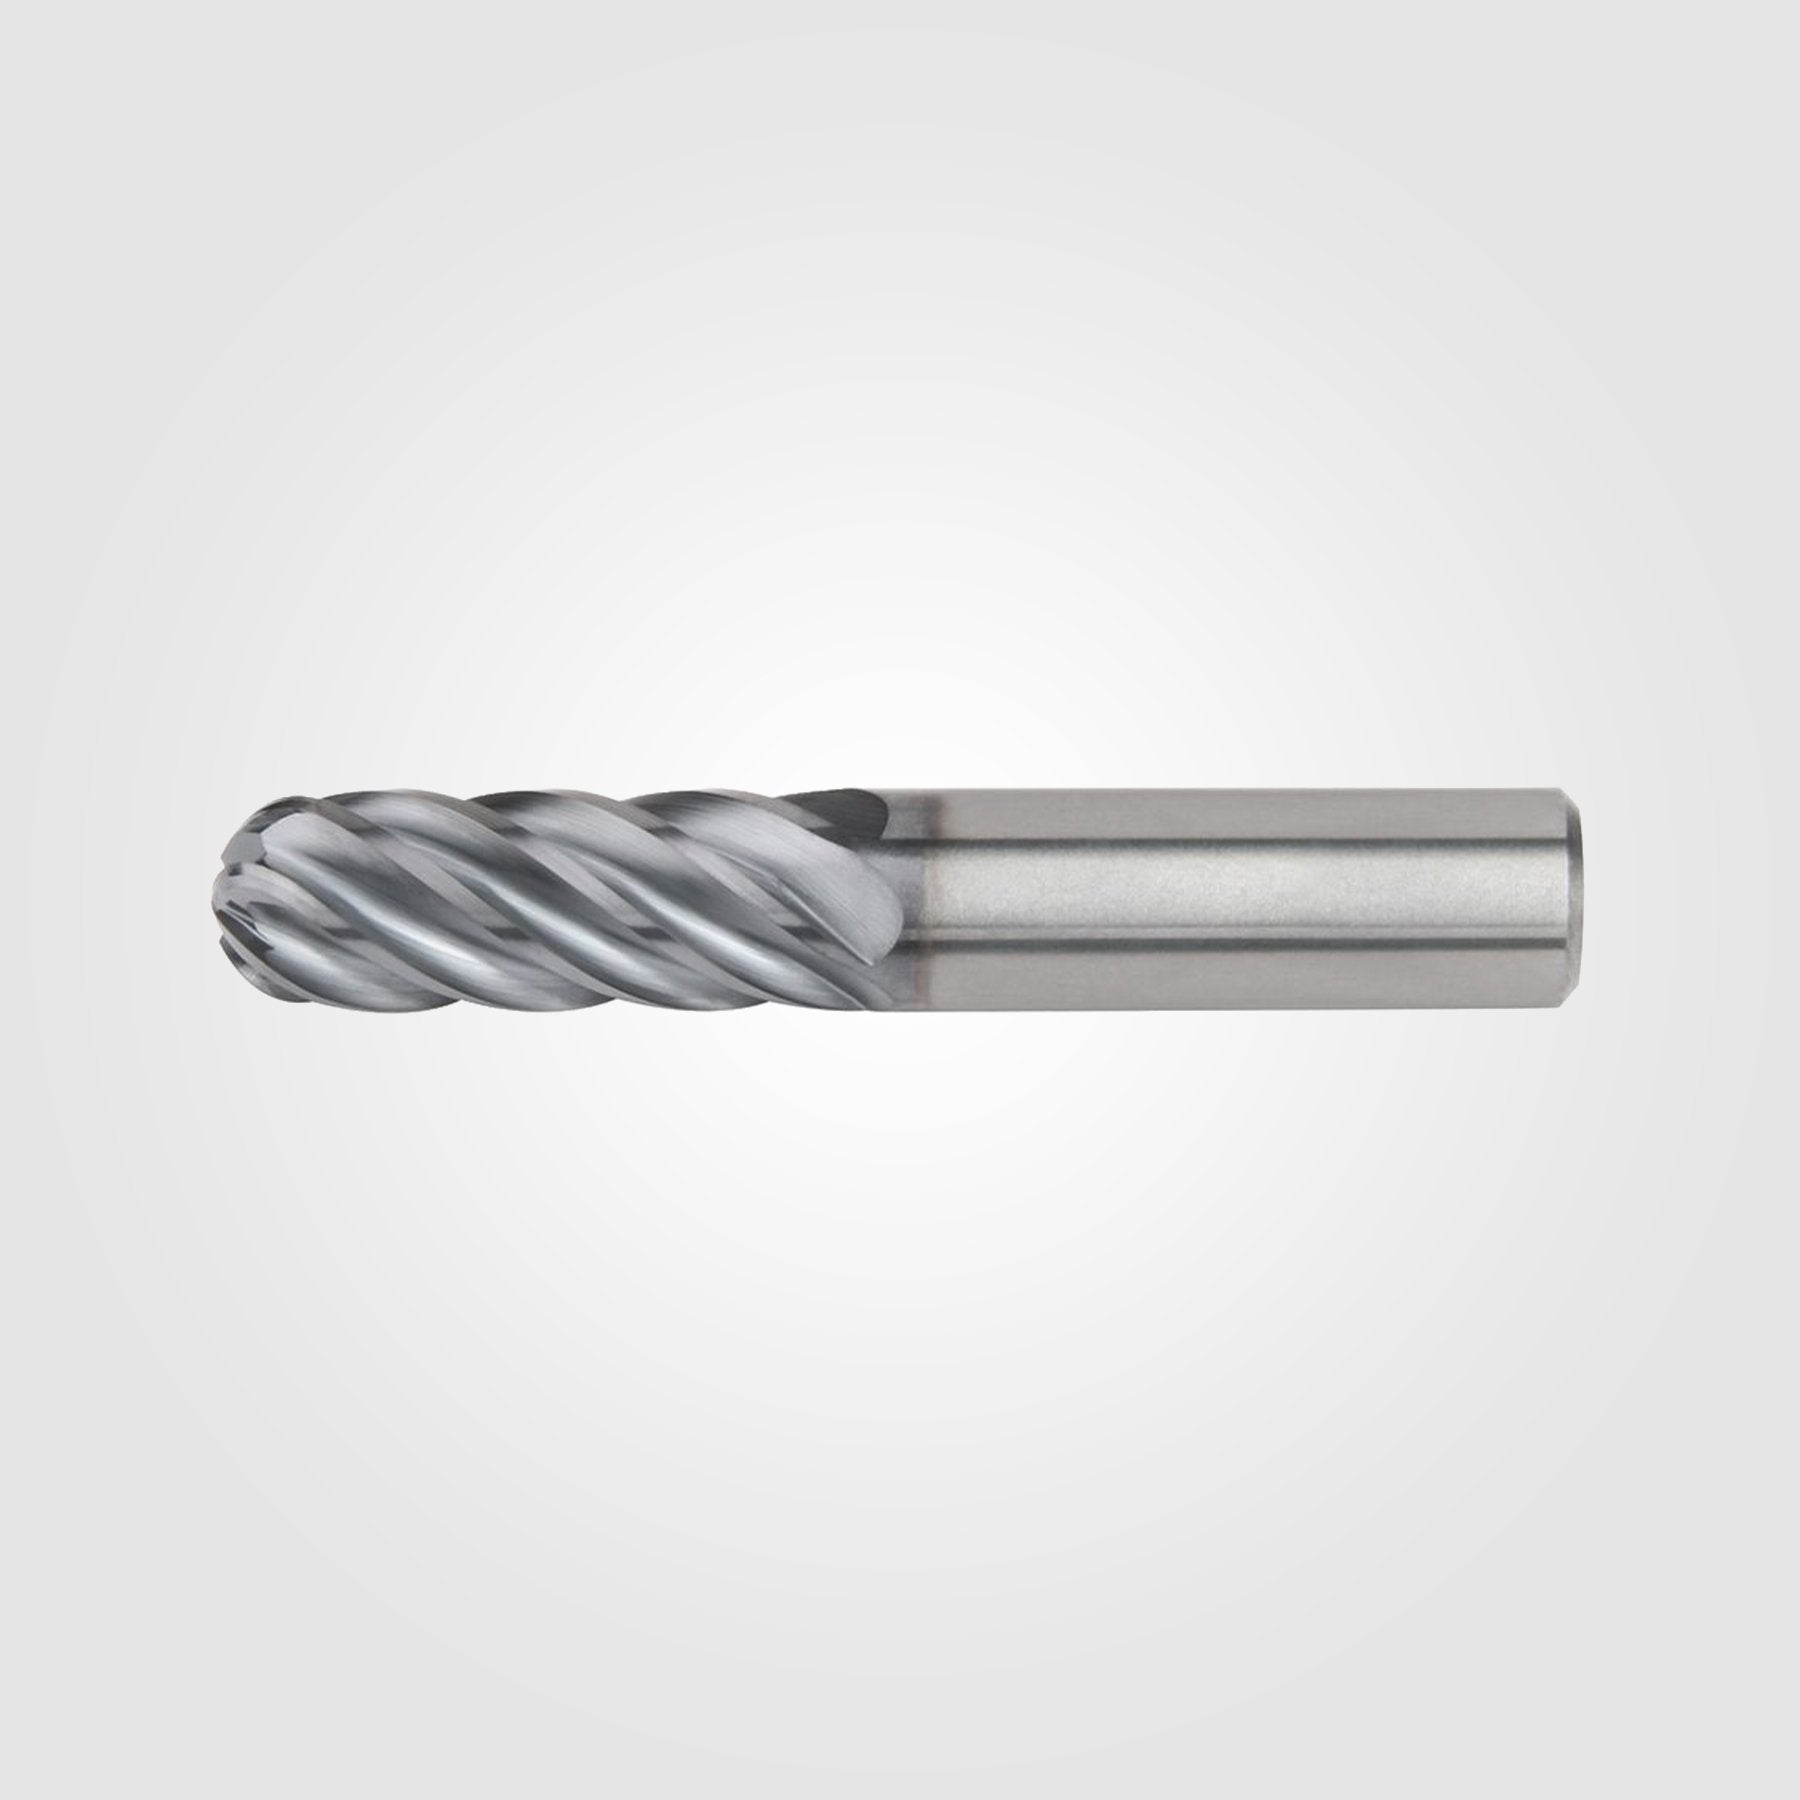 HARVI III (BALL NOSE AEROSPACE EXPANSION) | 3/4" x 3/4" x 1" x 3 1/2" | 6 FLUTE SOLID CARBIDE ENDMILL | 6113202